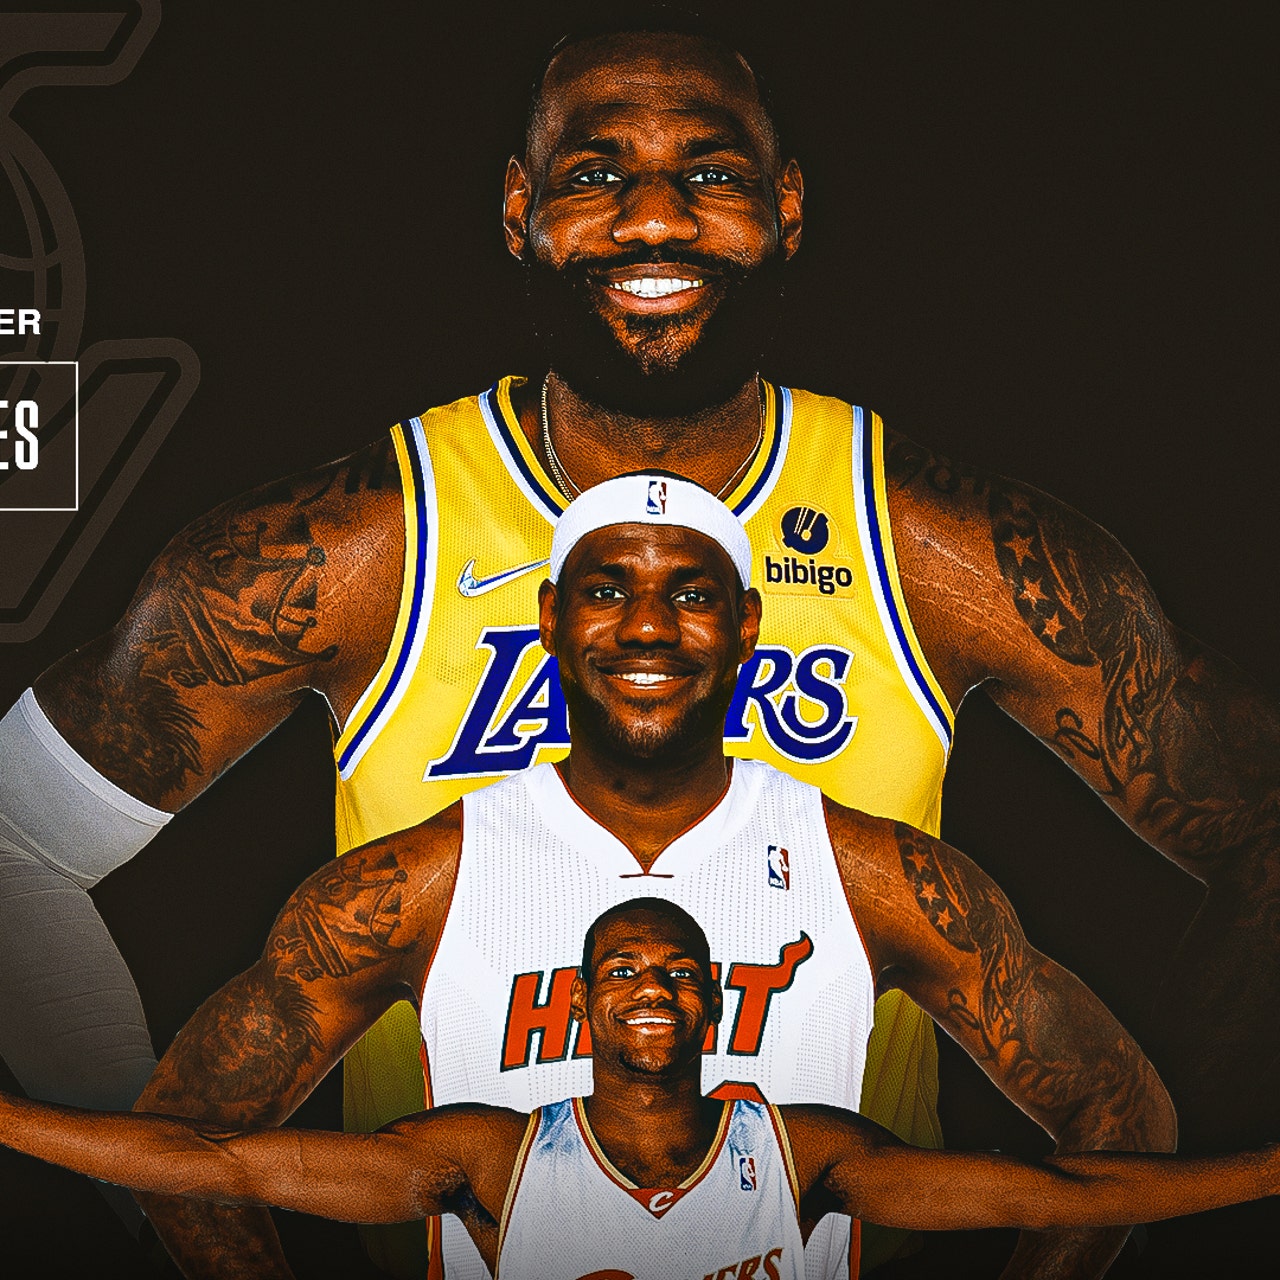 Head to head: LeBron James is the new greatest of all time - The